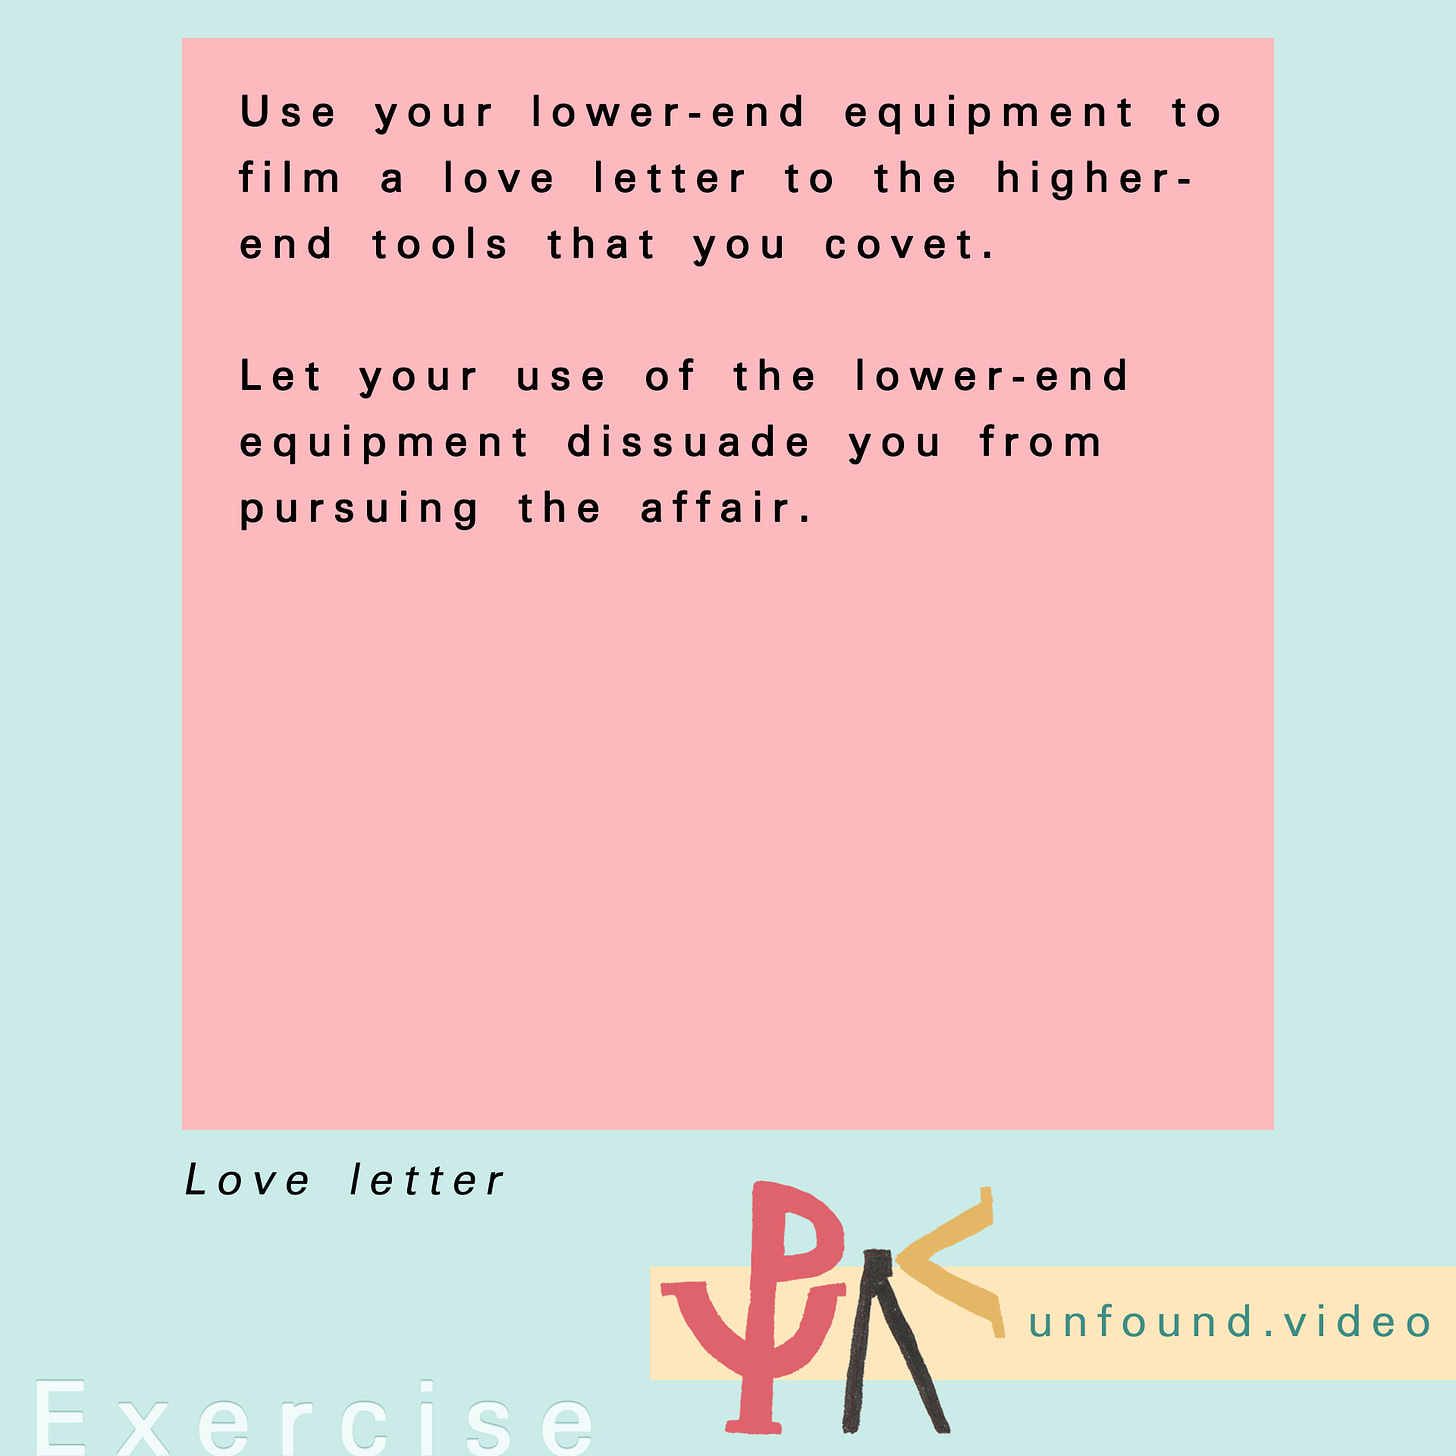 Exercise. Text reads: Use your lower-end equipment to film a love letter to the higher- end tools that you covet.  Let your use of the lower-end equipment dissuade you from pursuing the affair.